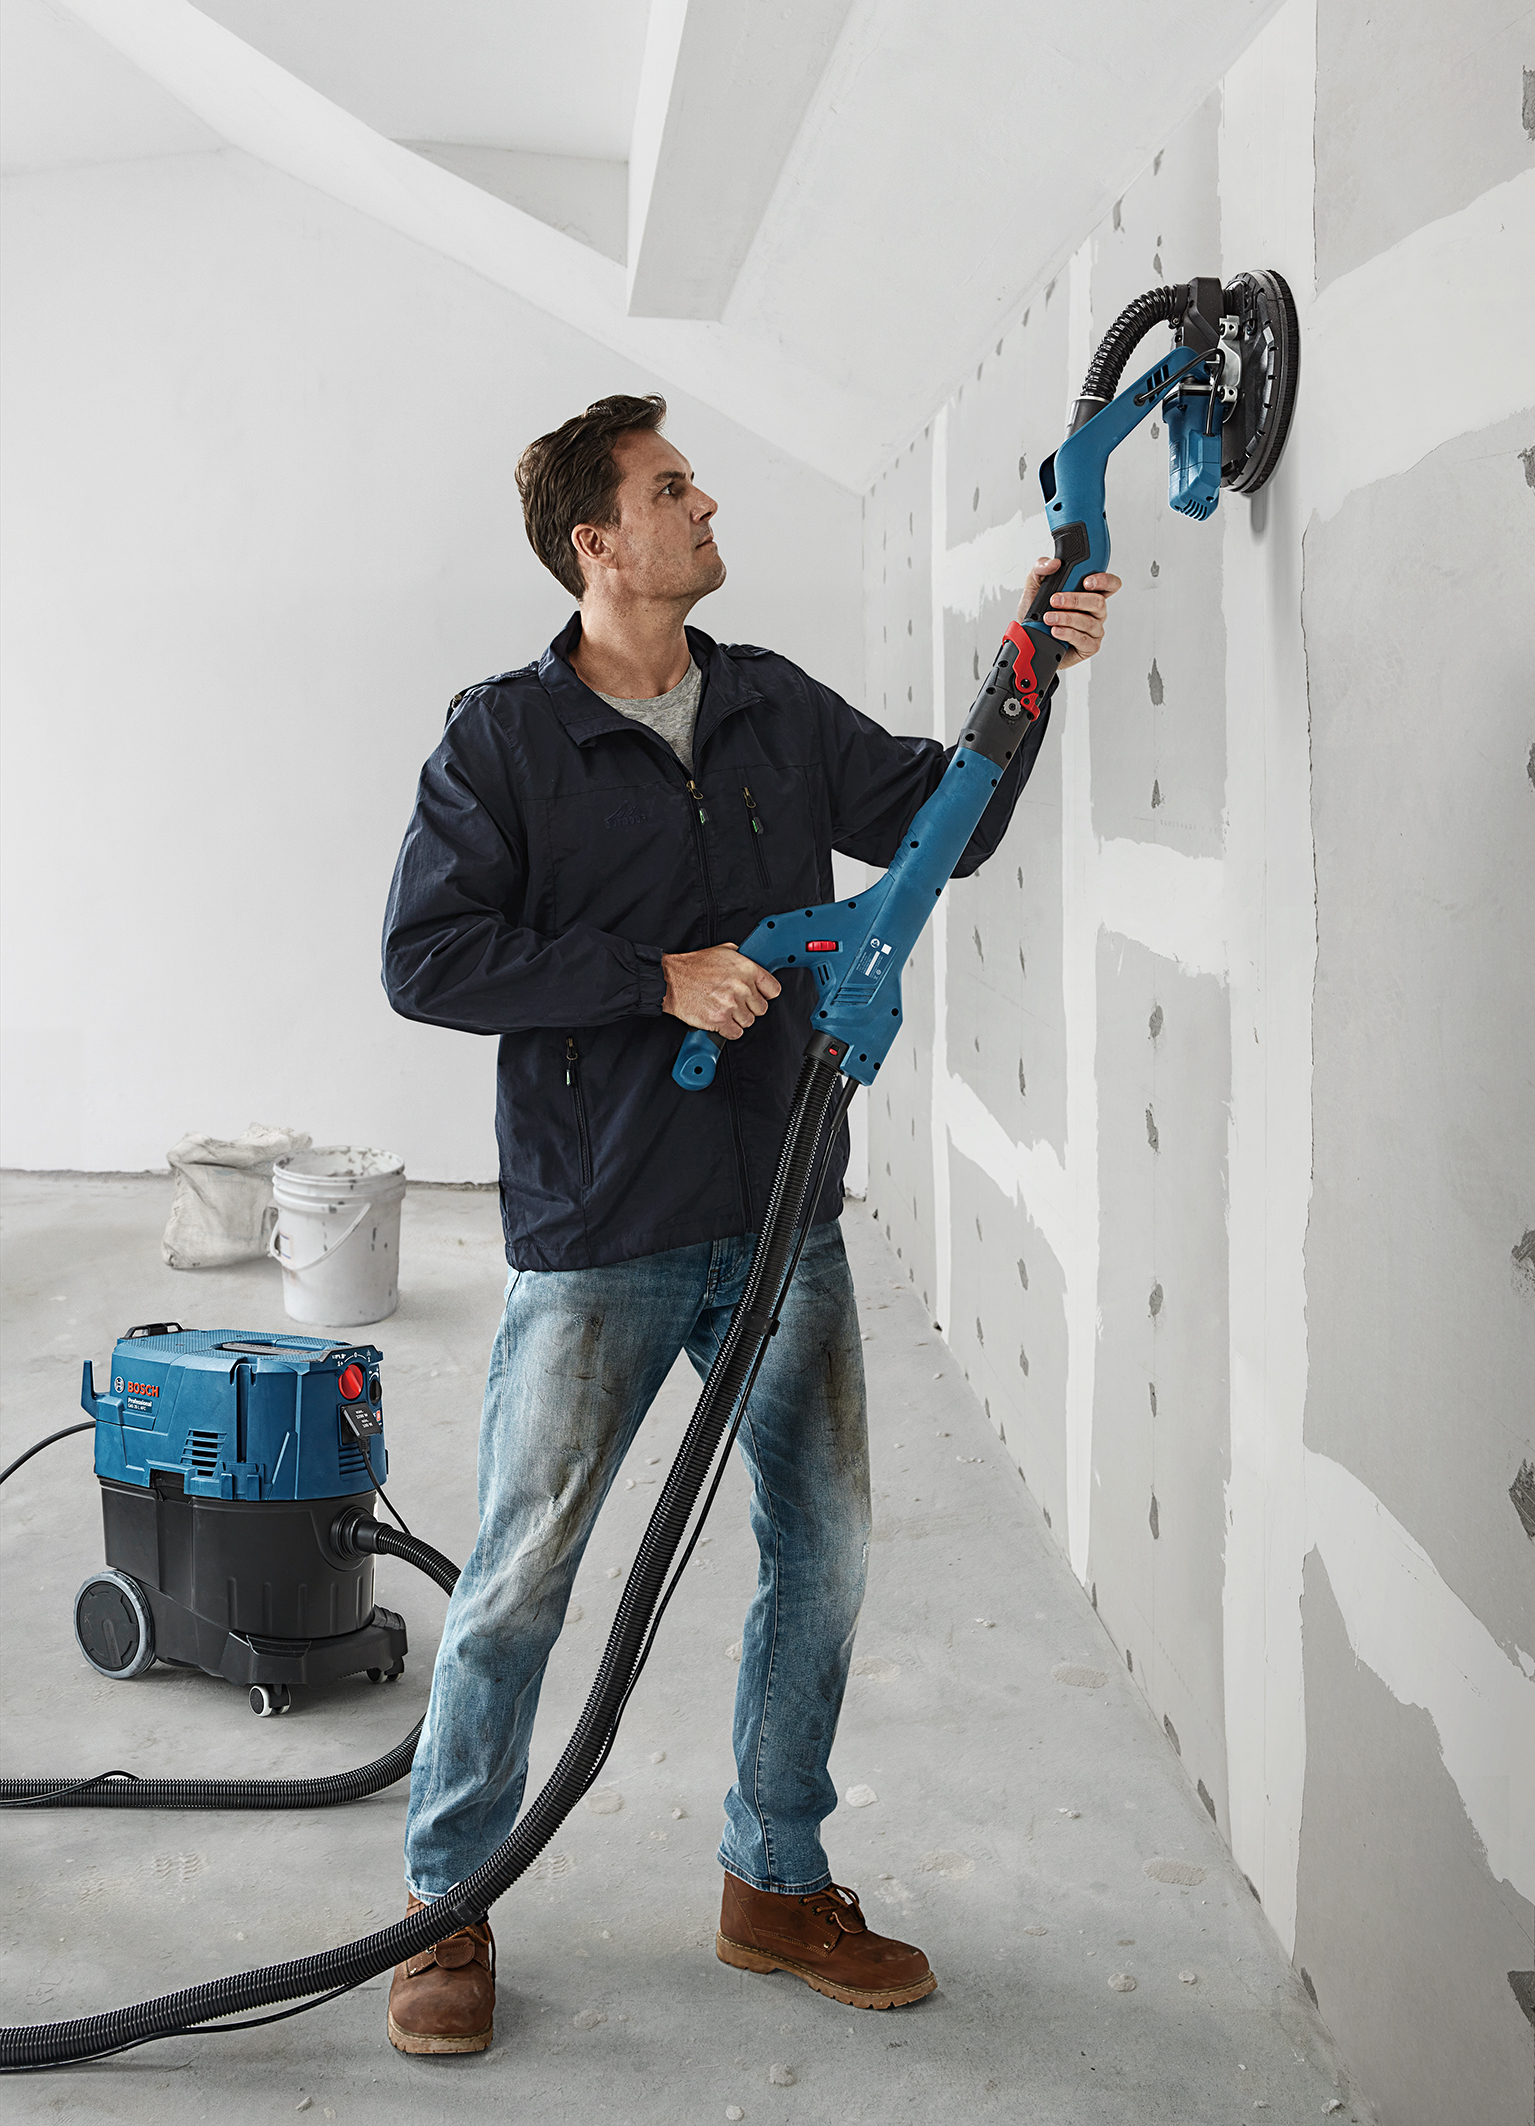 Flat on the surface and high removal rate due to ultra-flexible head: GTR 55-225 Professional drywall sander from Bosch for professionals